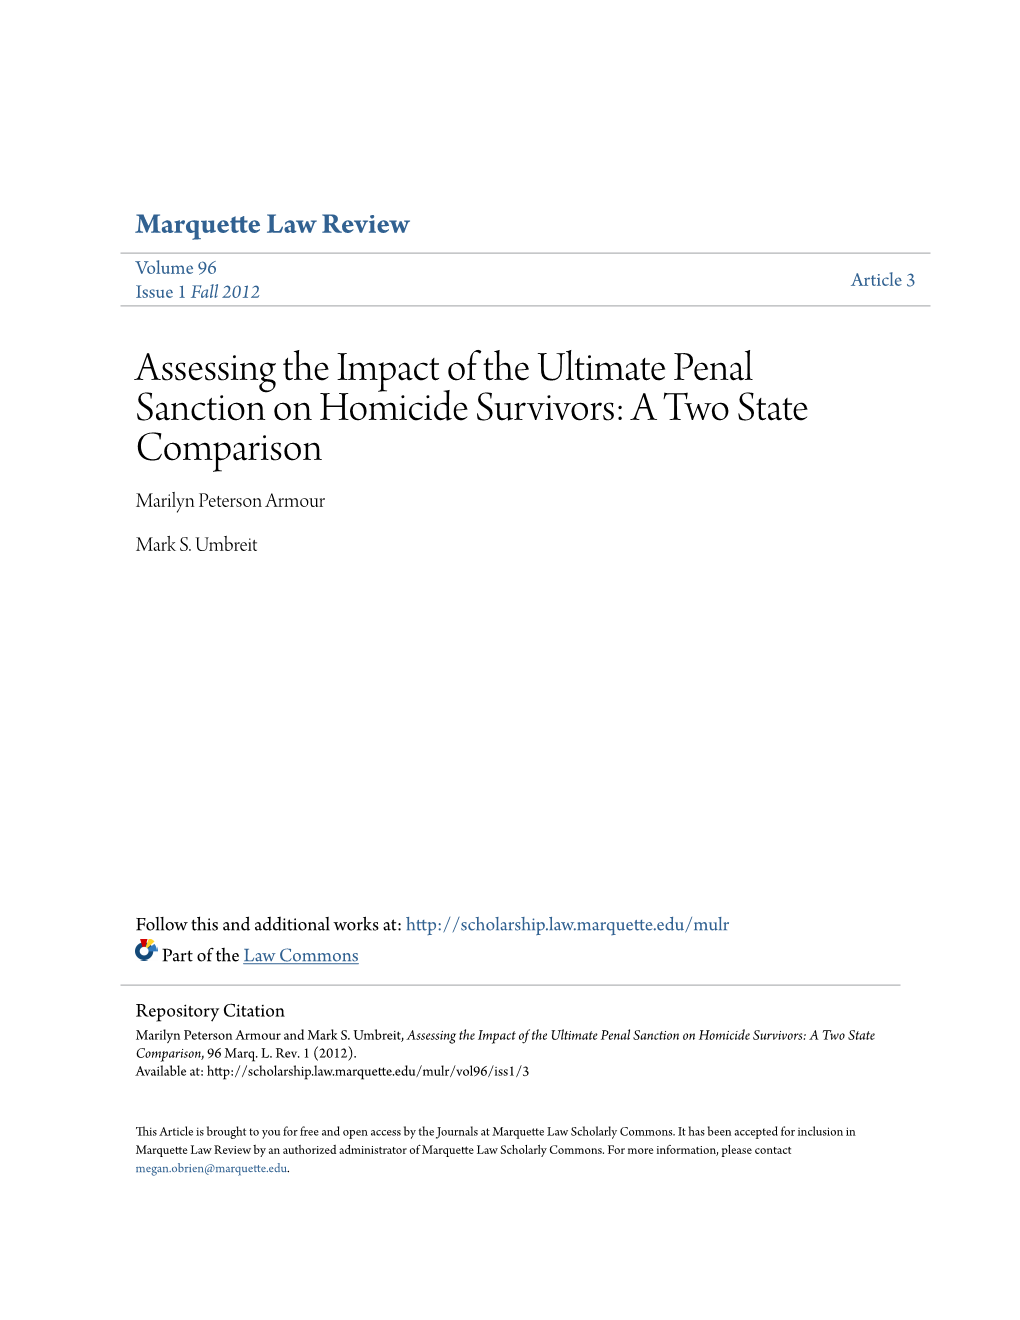 Assessing the Impact of the Ultimate Penal Sanction on Homicide Survivors: a Two State Comparison Marilyn Peterson Armour